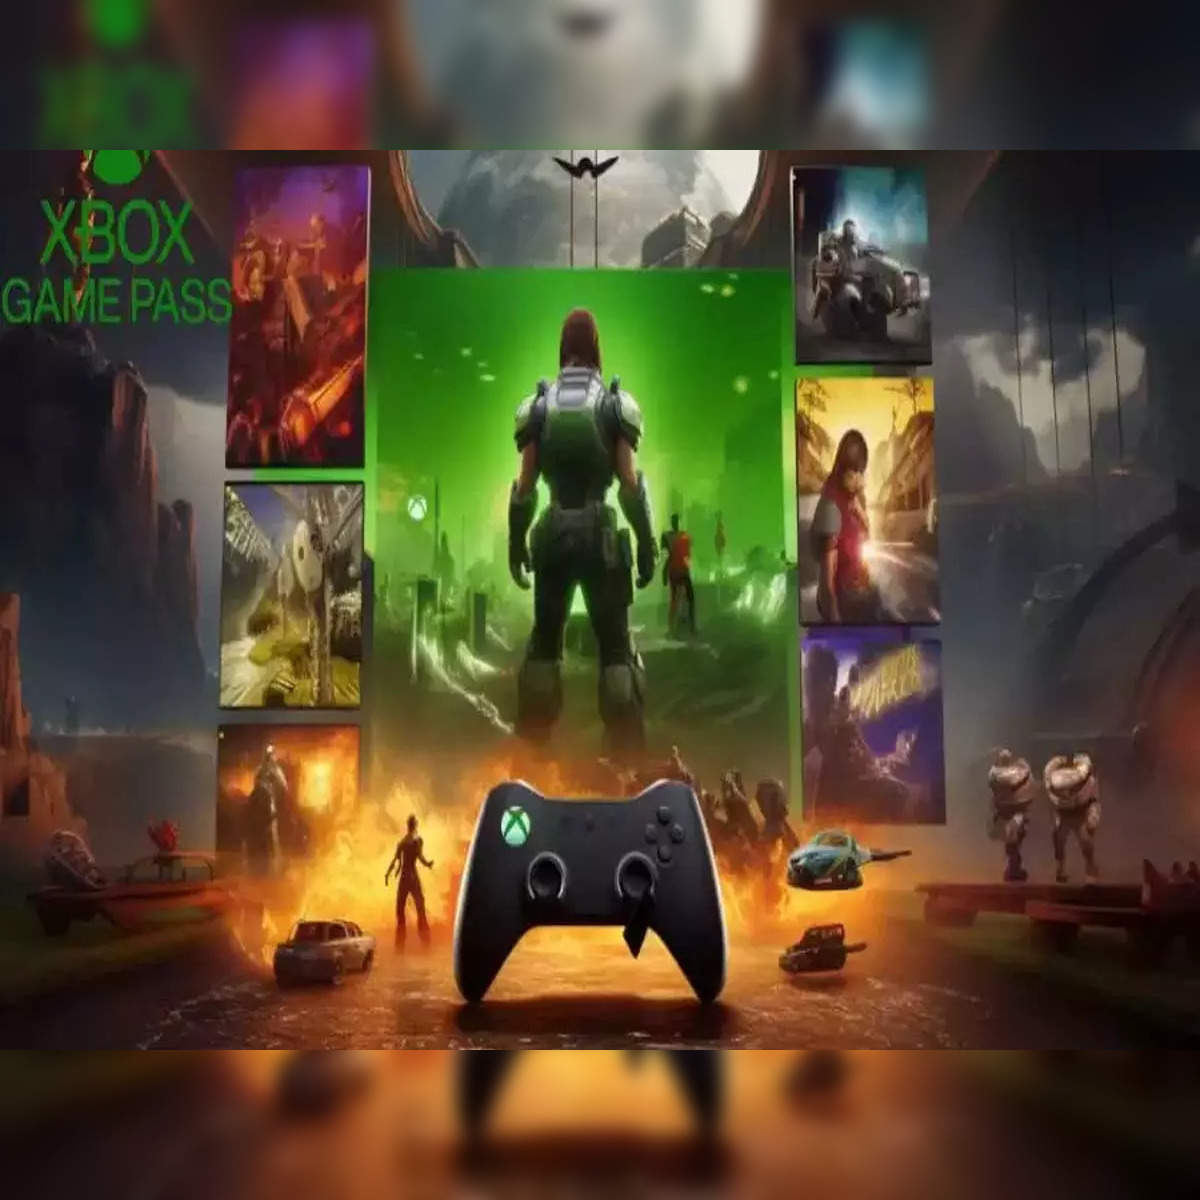  Games - Xbox One: Video Games